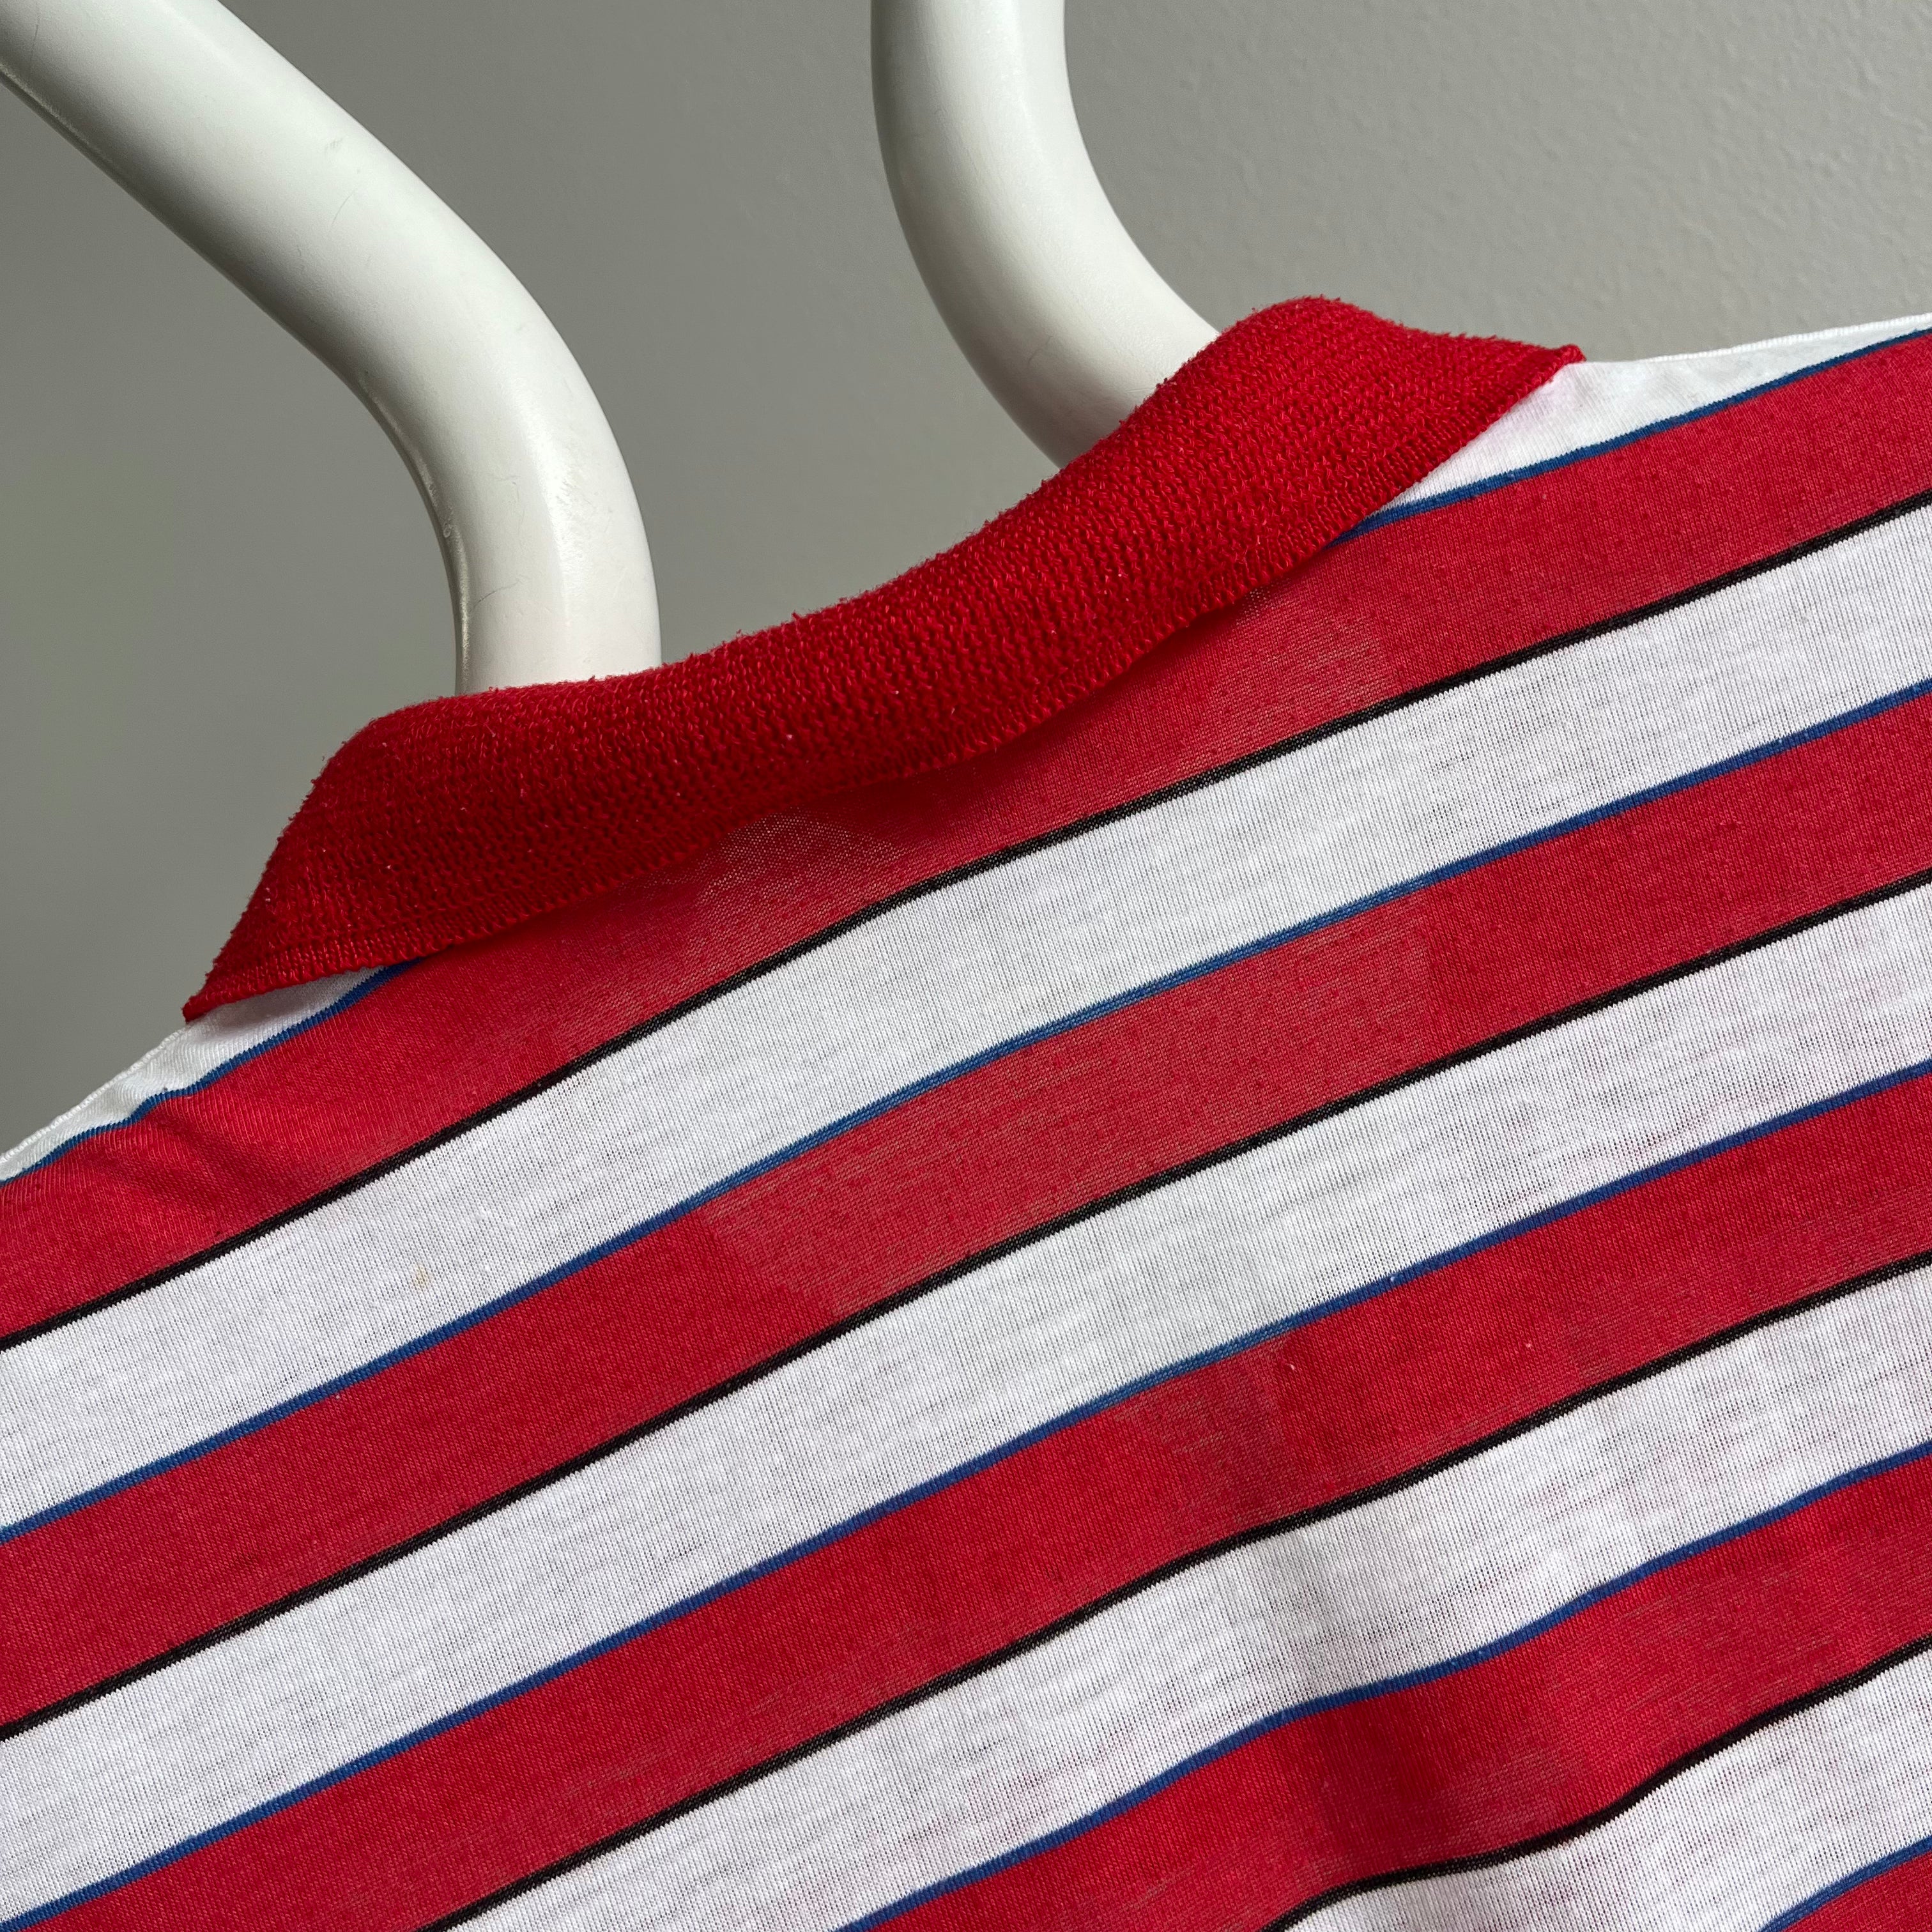 1980s Striped Slouchy Polo Shirt